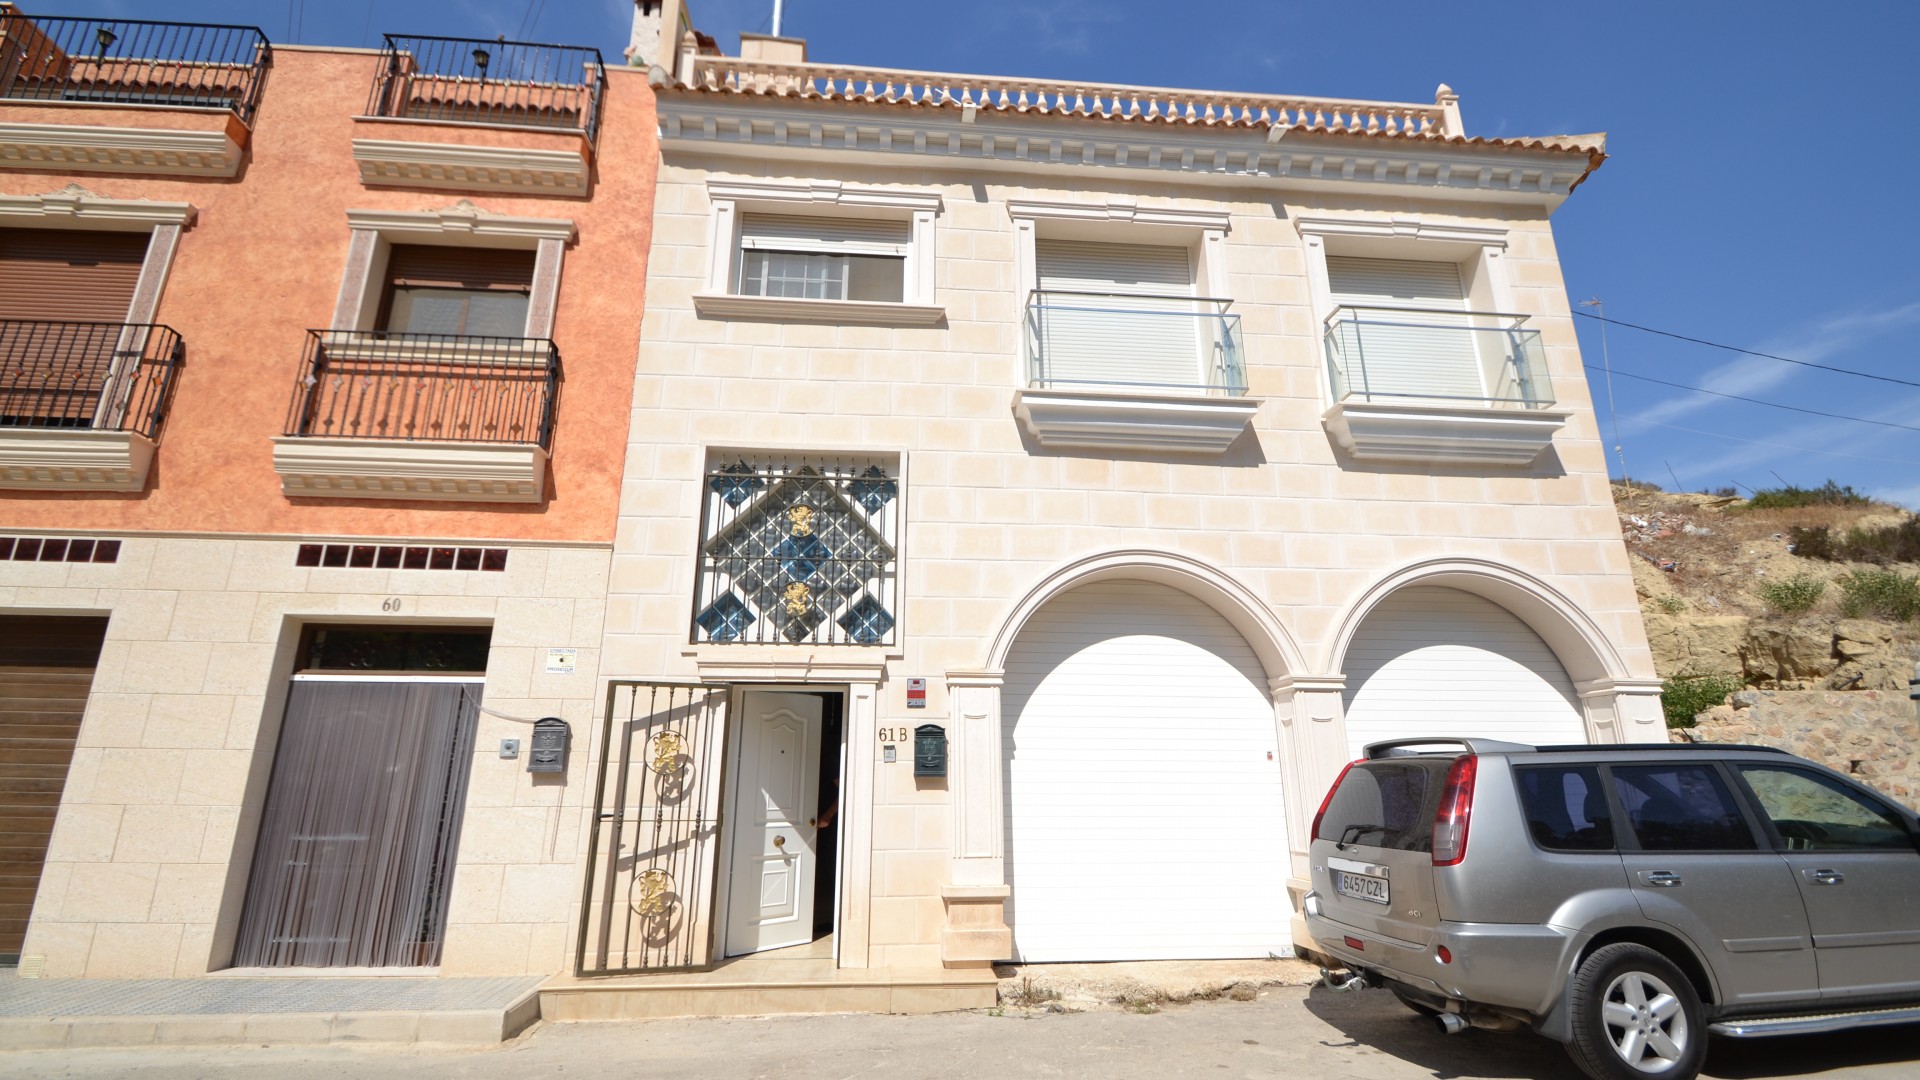 Villa/house in Rojales of 248m2 built over 3 floors, 3 bedrooms, large terrace. Parking for 6 cars. Close to all amenities.